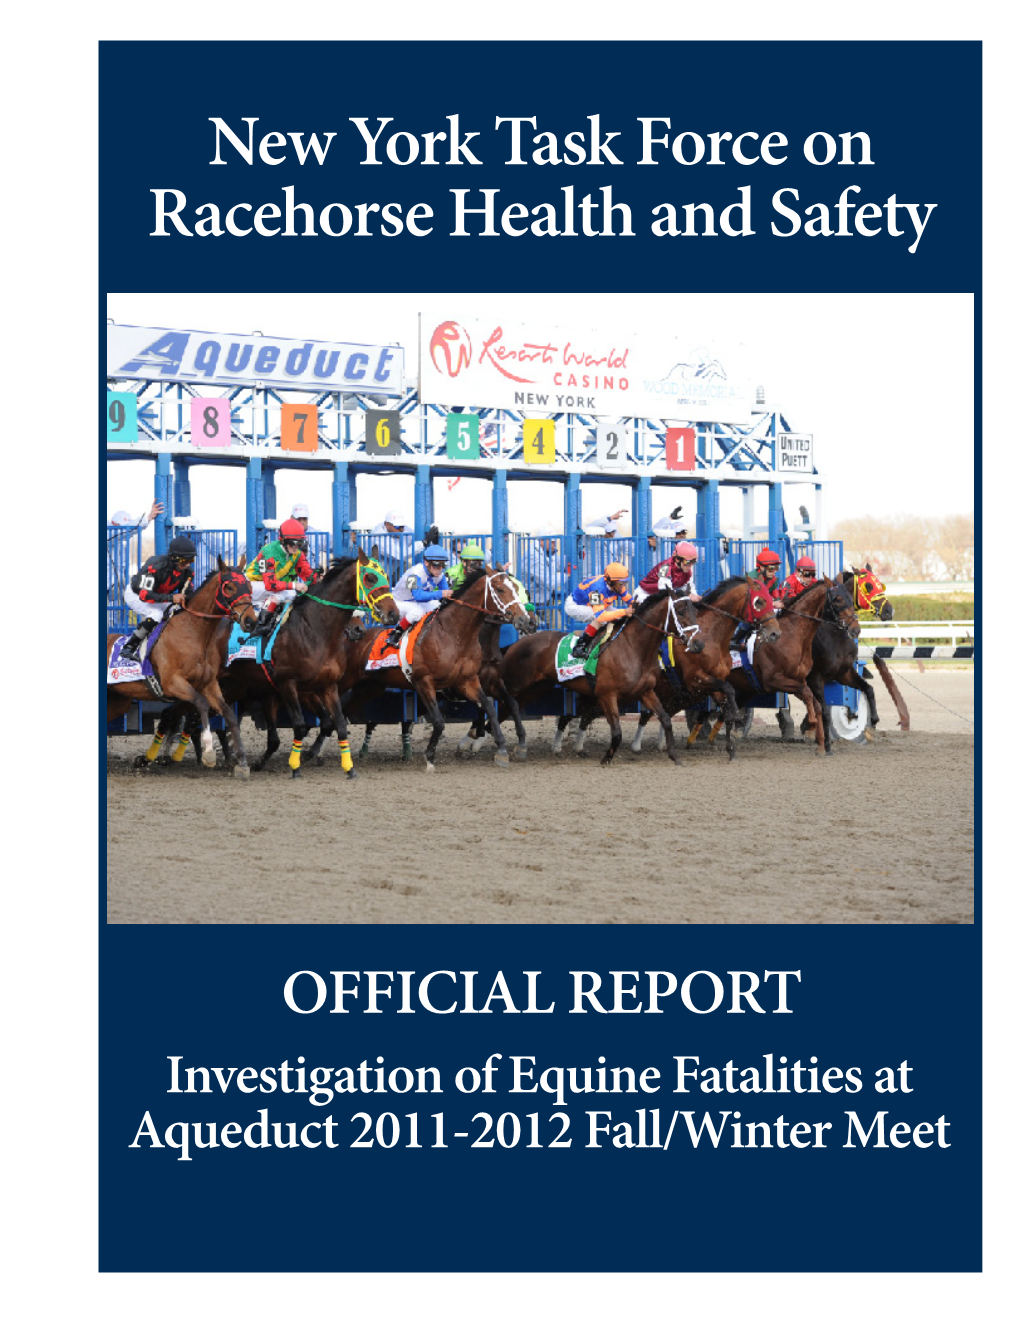 Task Force on Racehorse Health & Safety